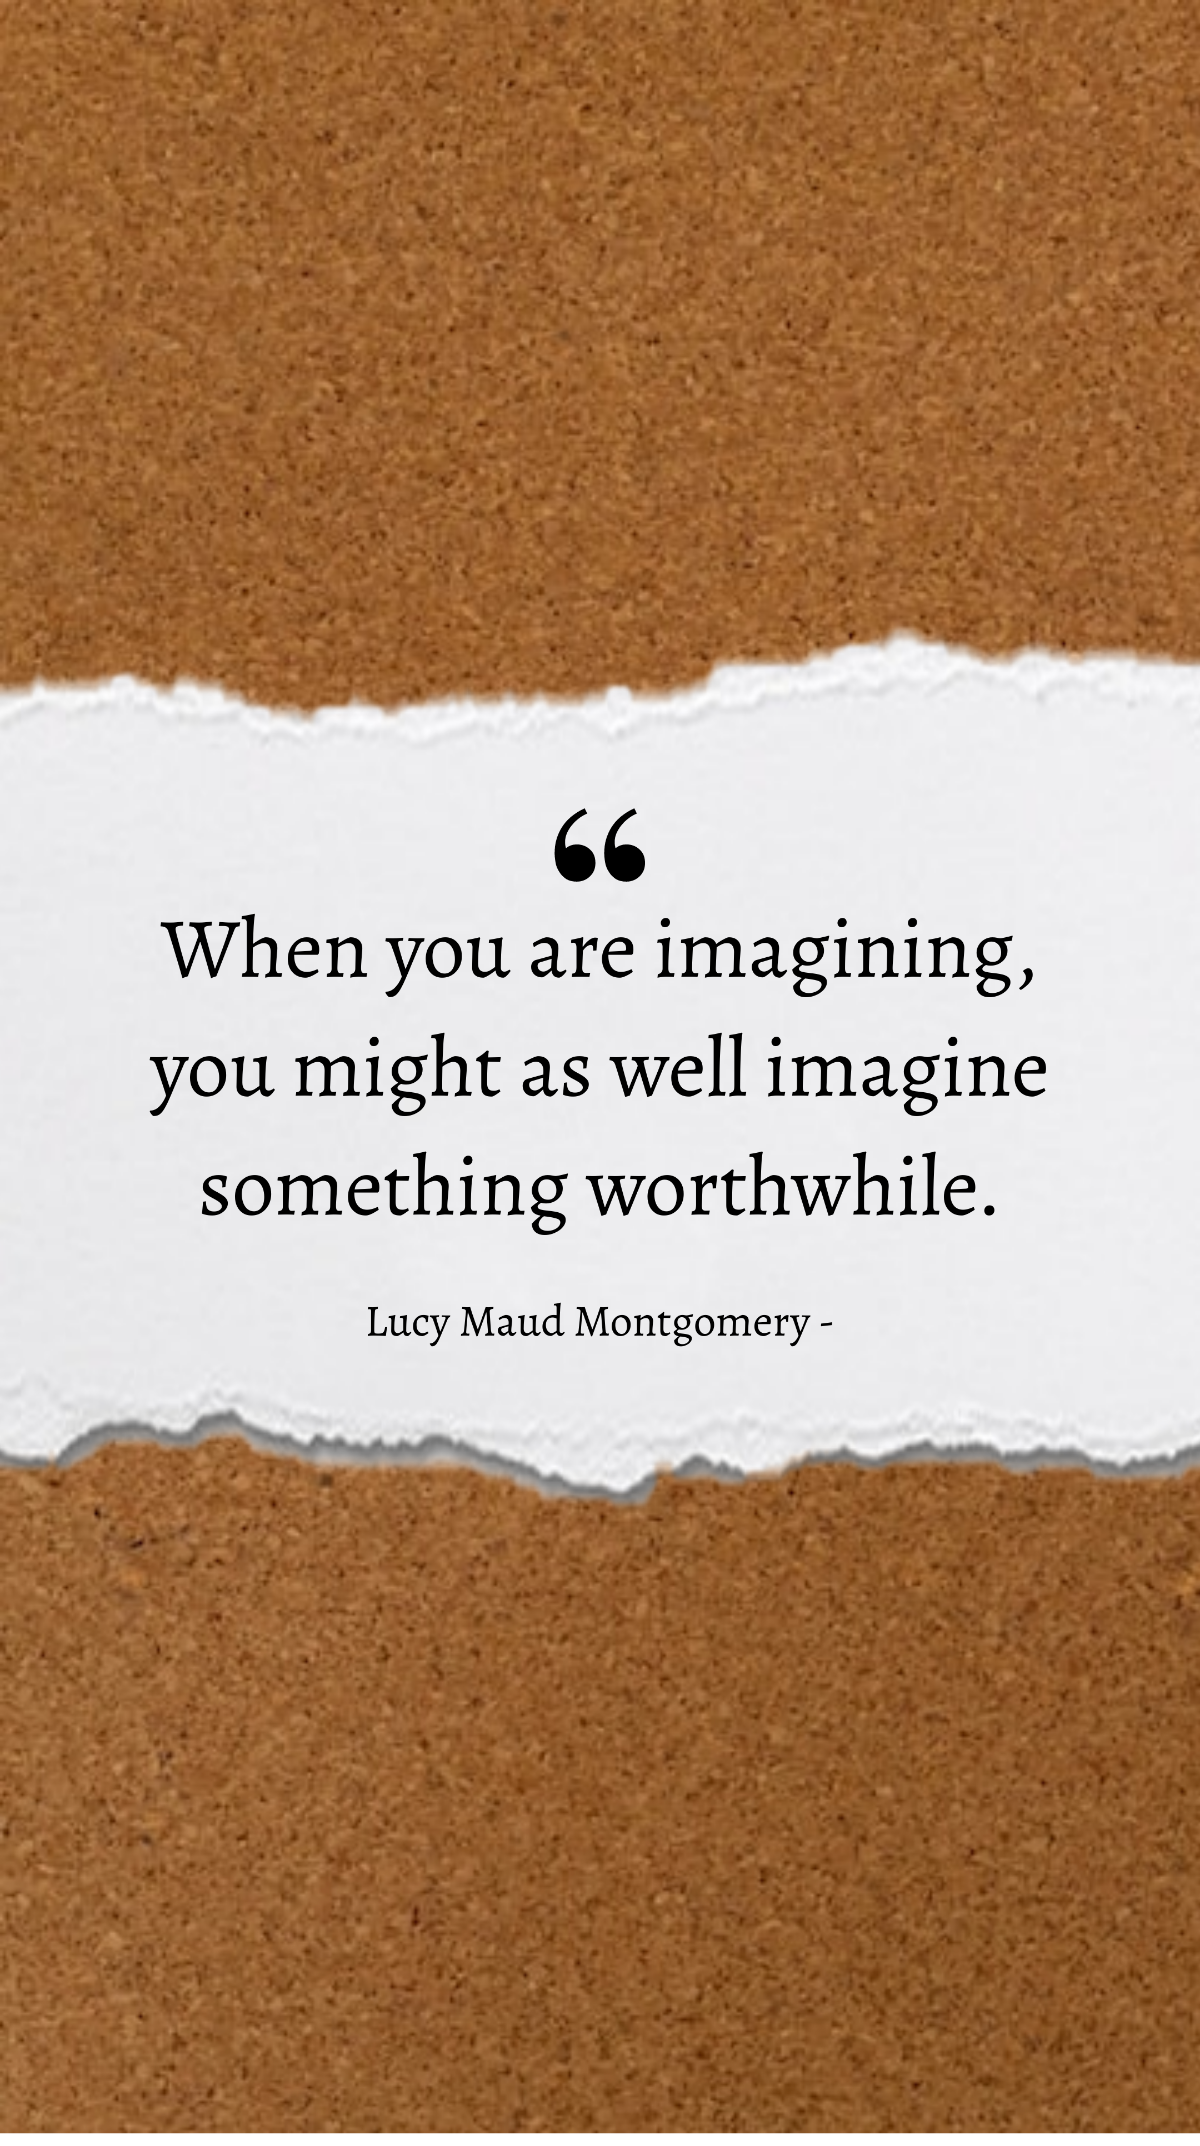 Lucy Maud Montgomery - When you are imagining, you might as well imagine something worthwhile. Template